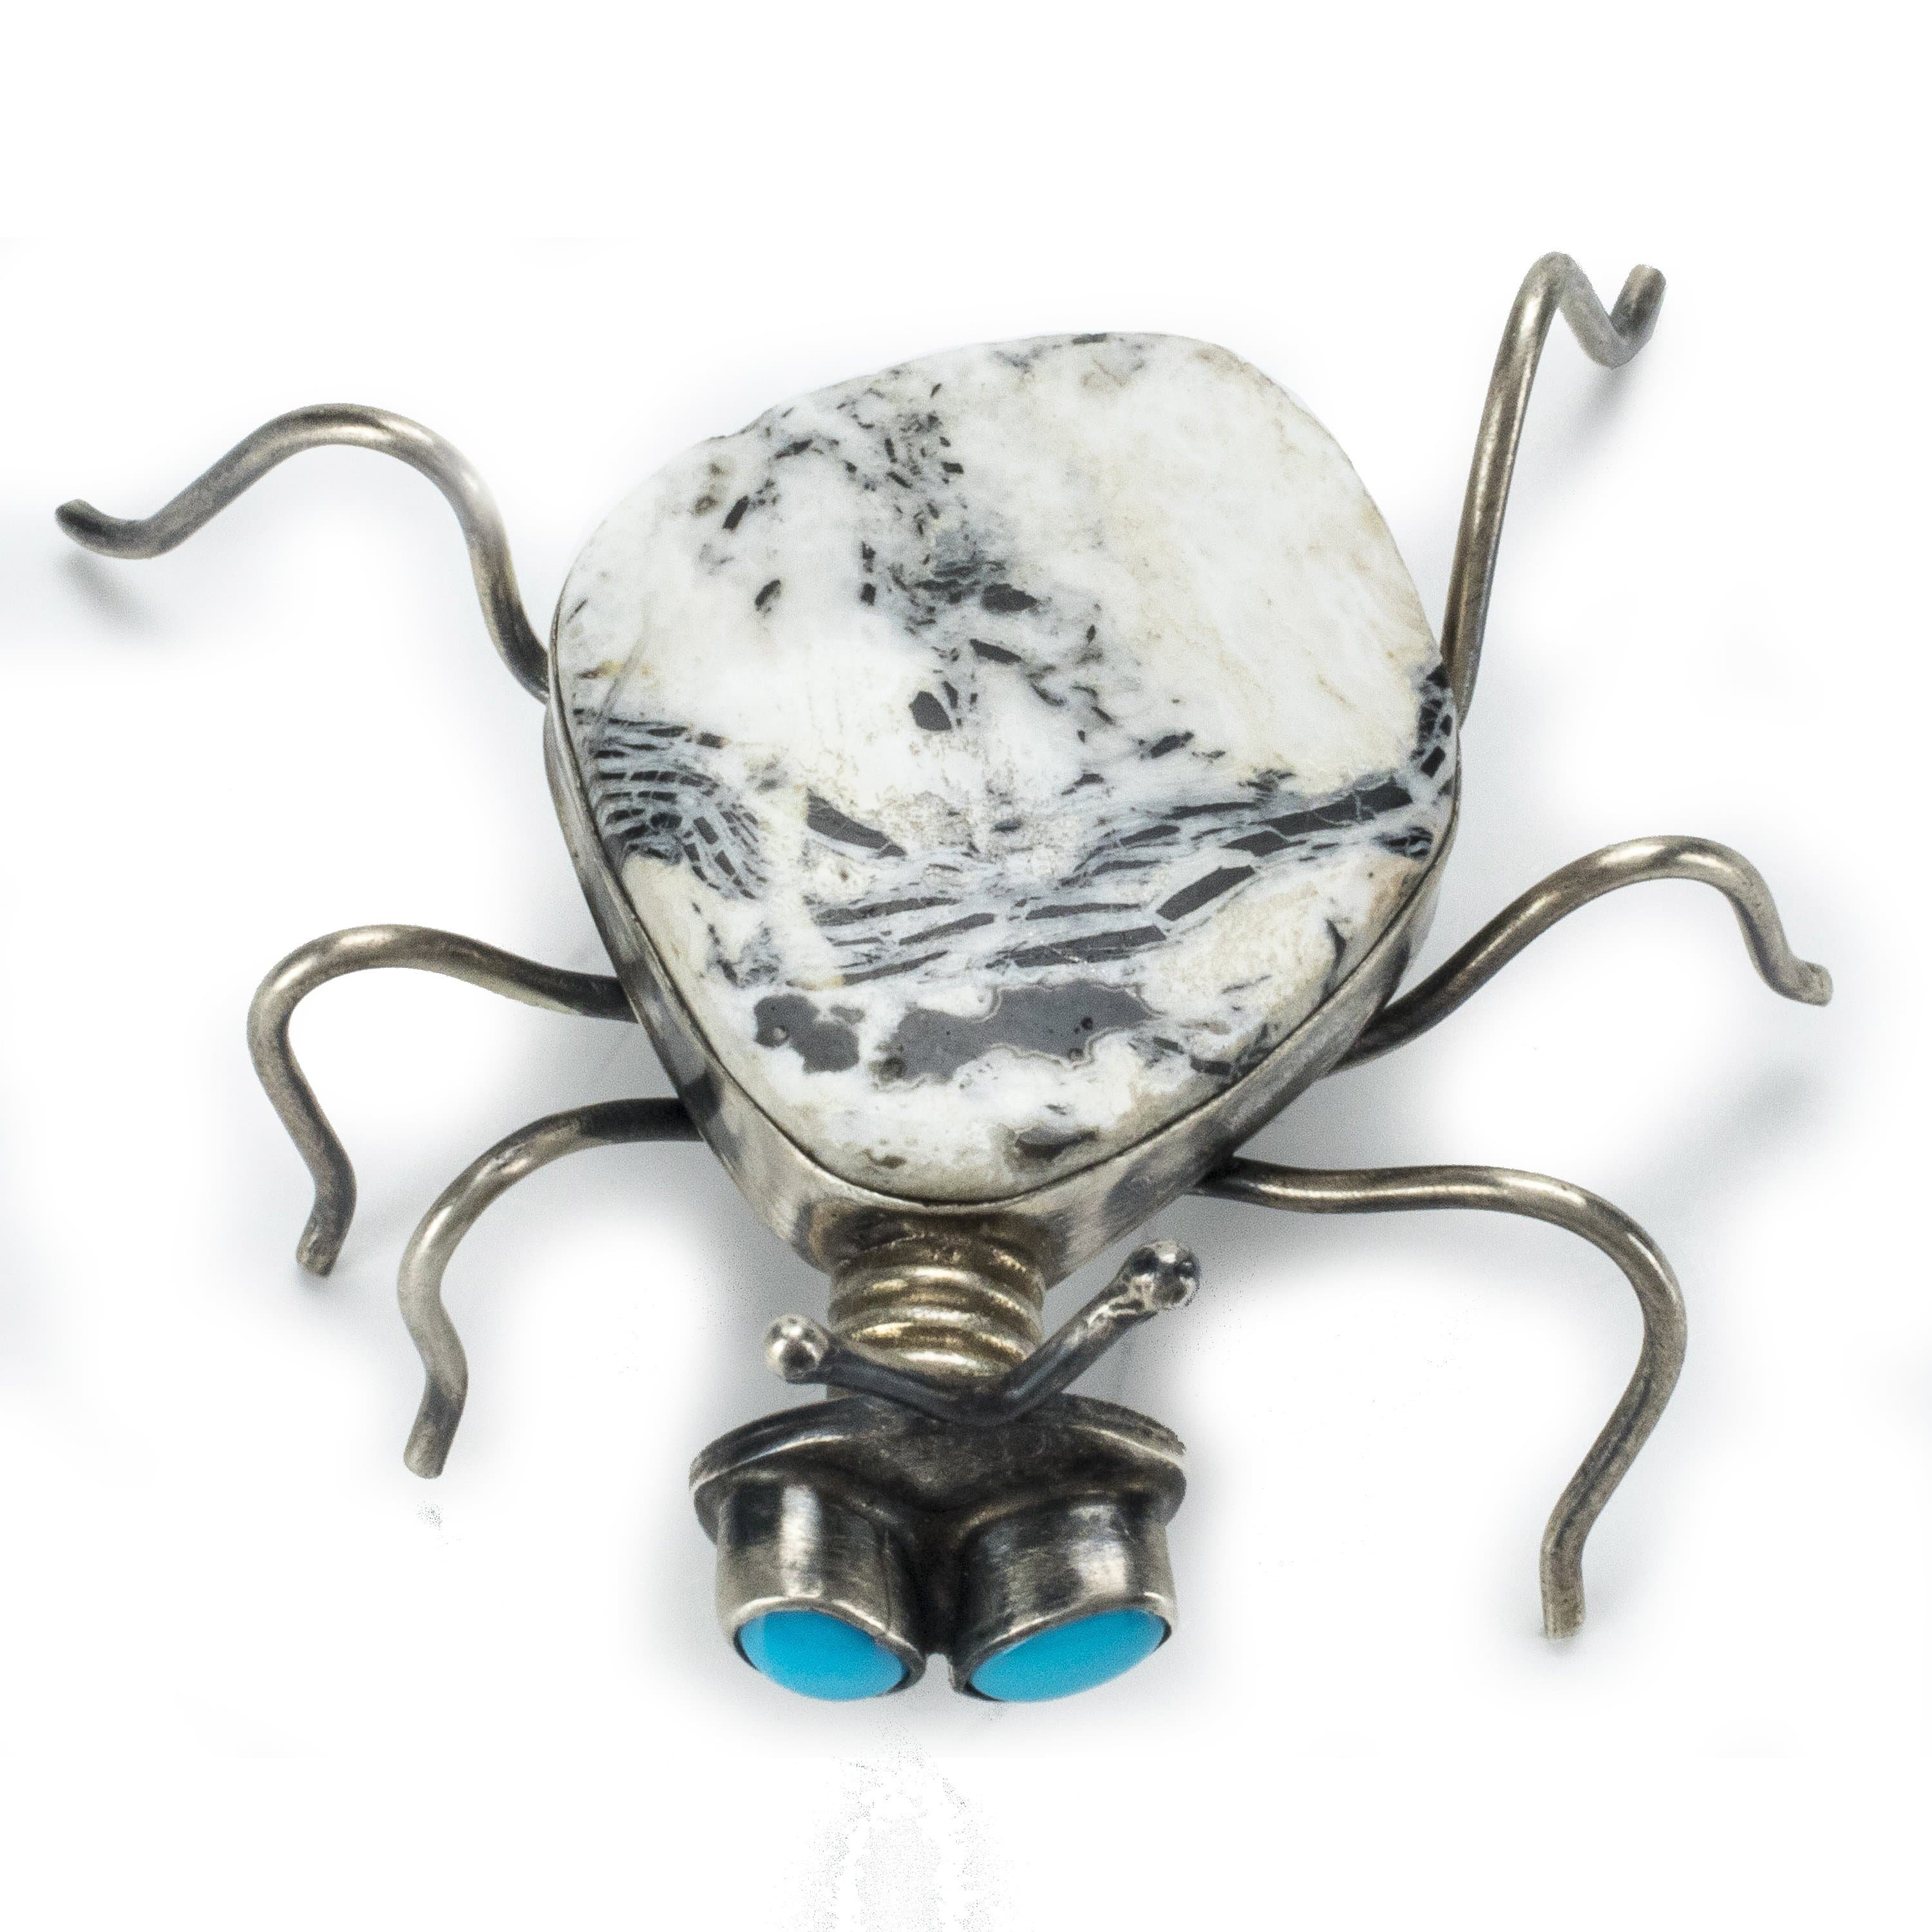 Kalifano Native American Jewelry L. Juan White Buffalo Turquoise with Sleeping Beauty Turquoise USA Native American Made 925 Sterling Silver Spider Pin NAP850.001